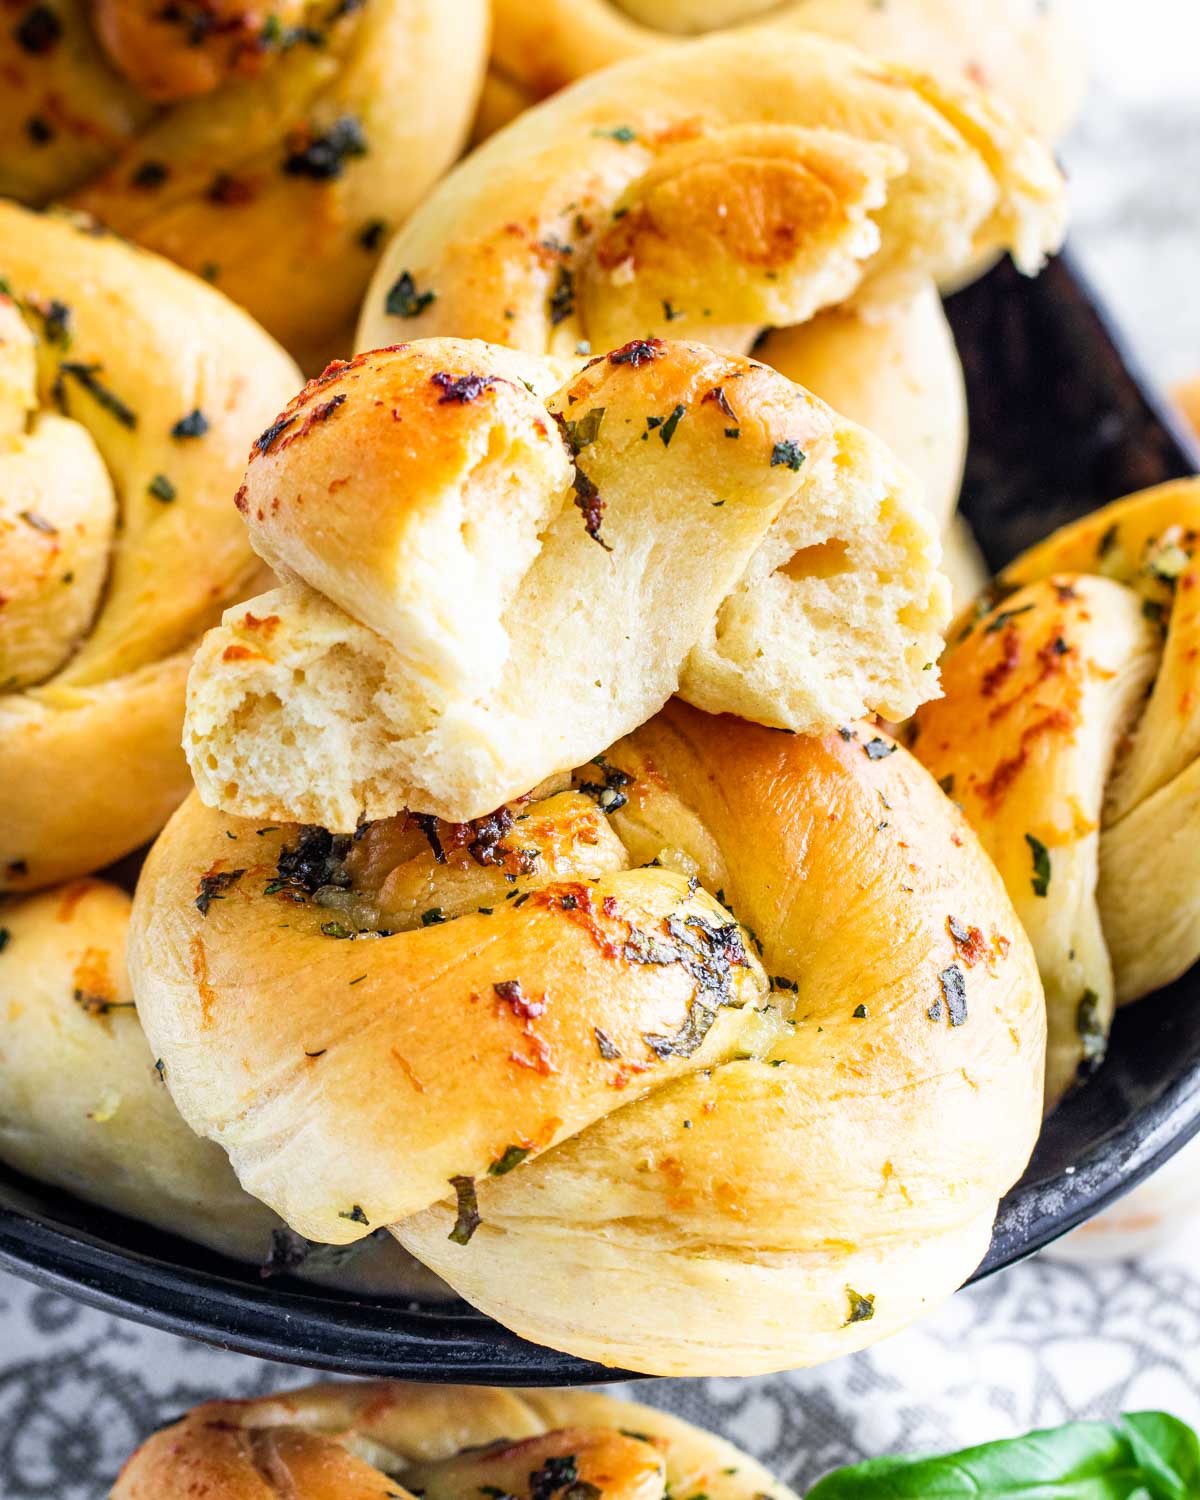 side view shot of garlic knots in a bread bowl with the top one broken in half and with some garlic knots surrounding the bowl